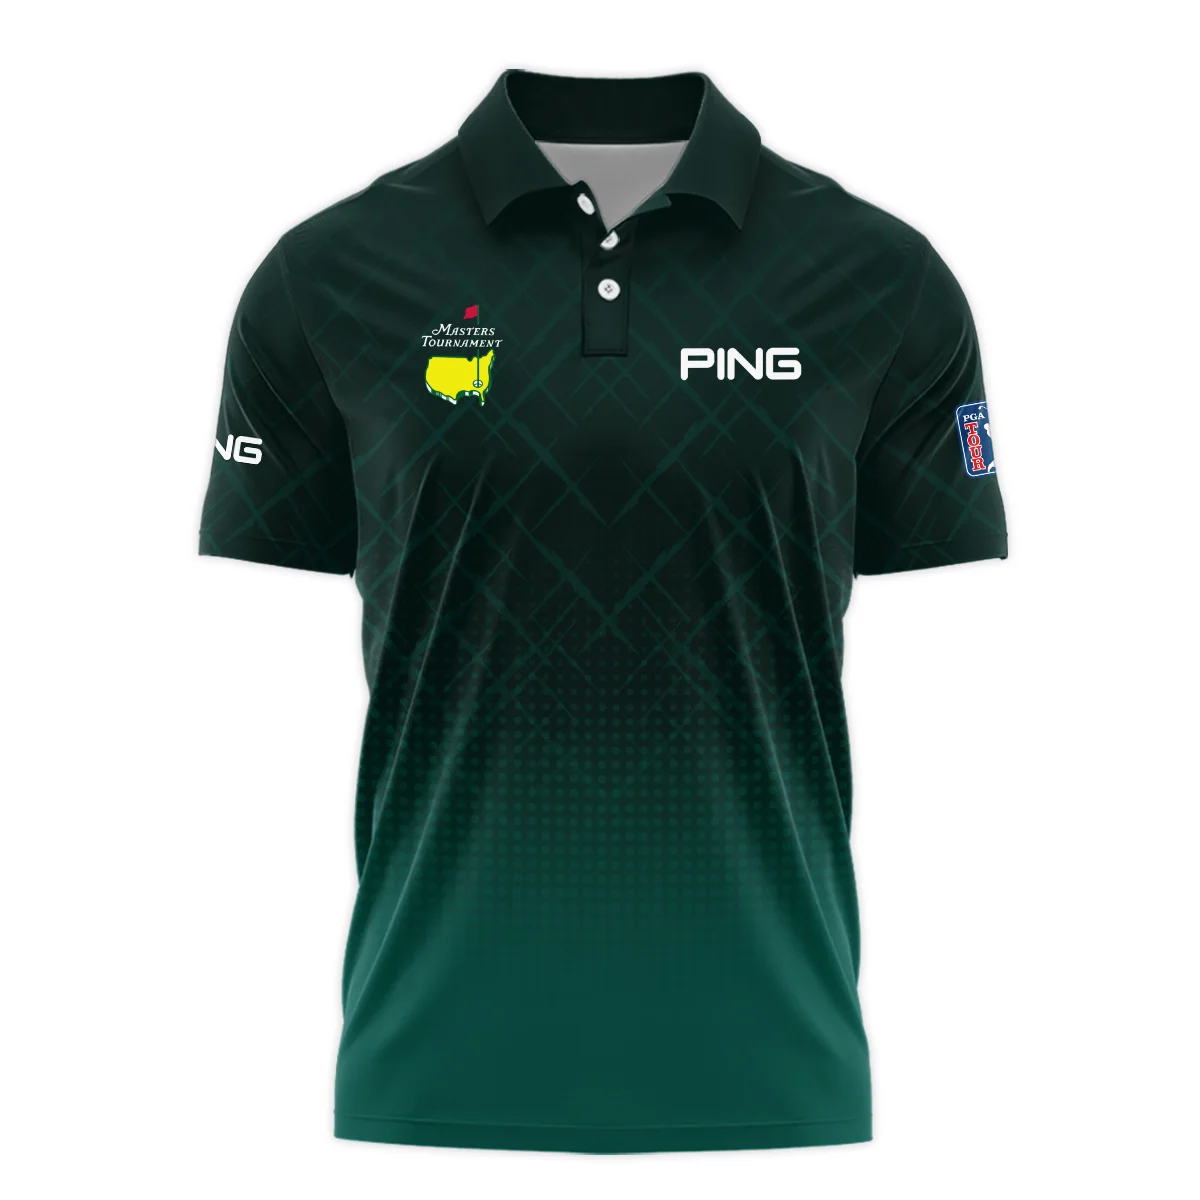 Ping Masters Tournament Sport Jersey Pattern Dark Green Polo Shirt Style Classic Polo Shirt For Men